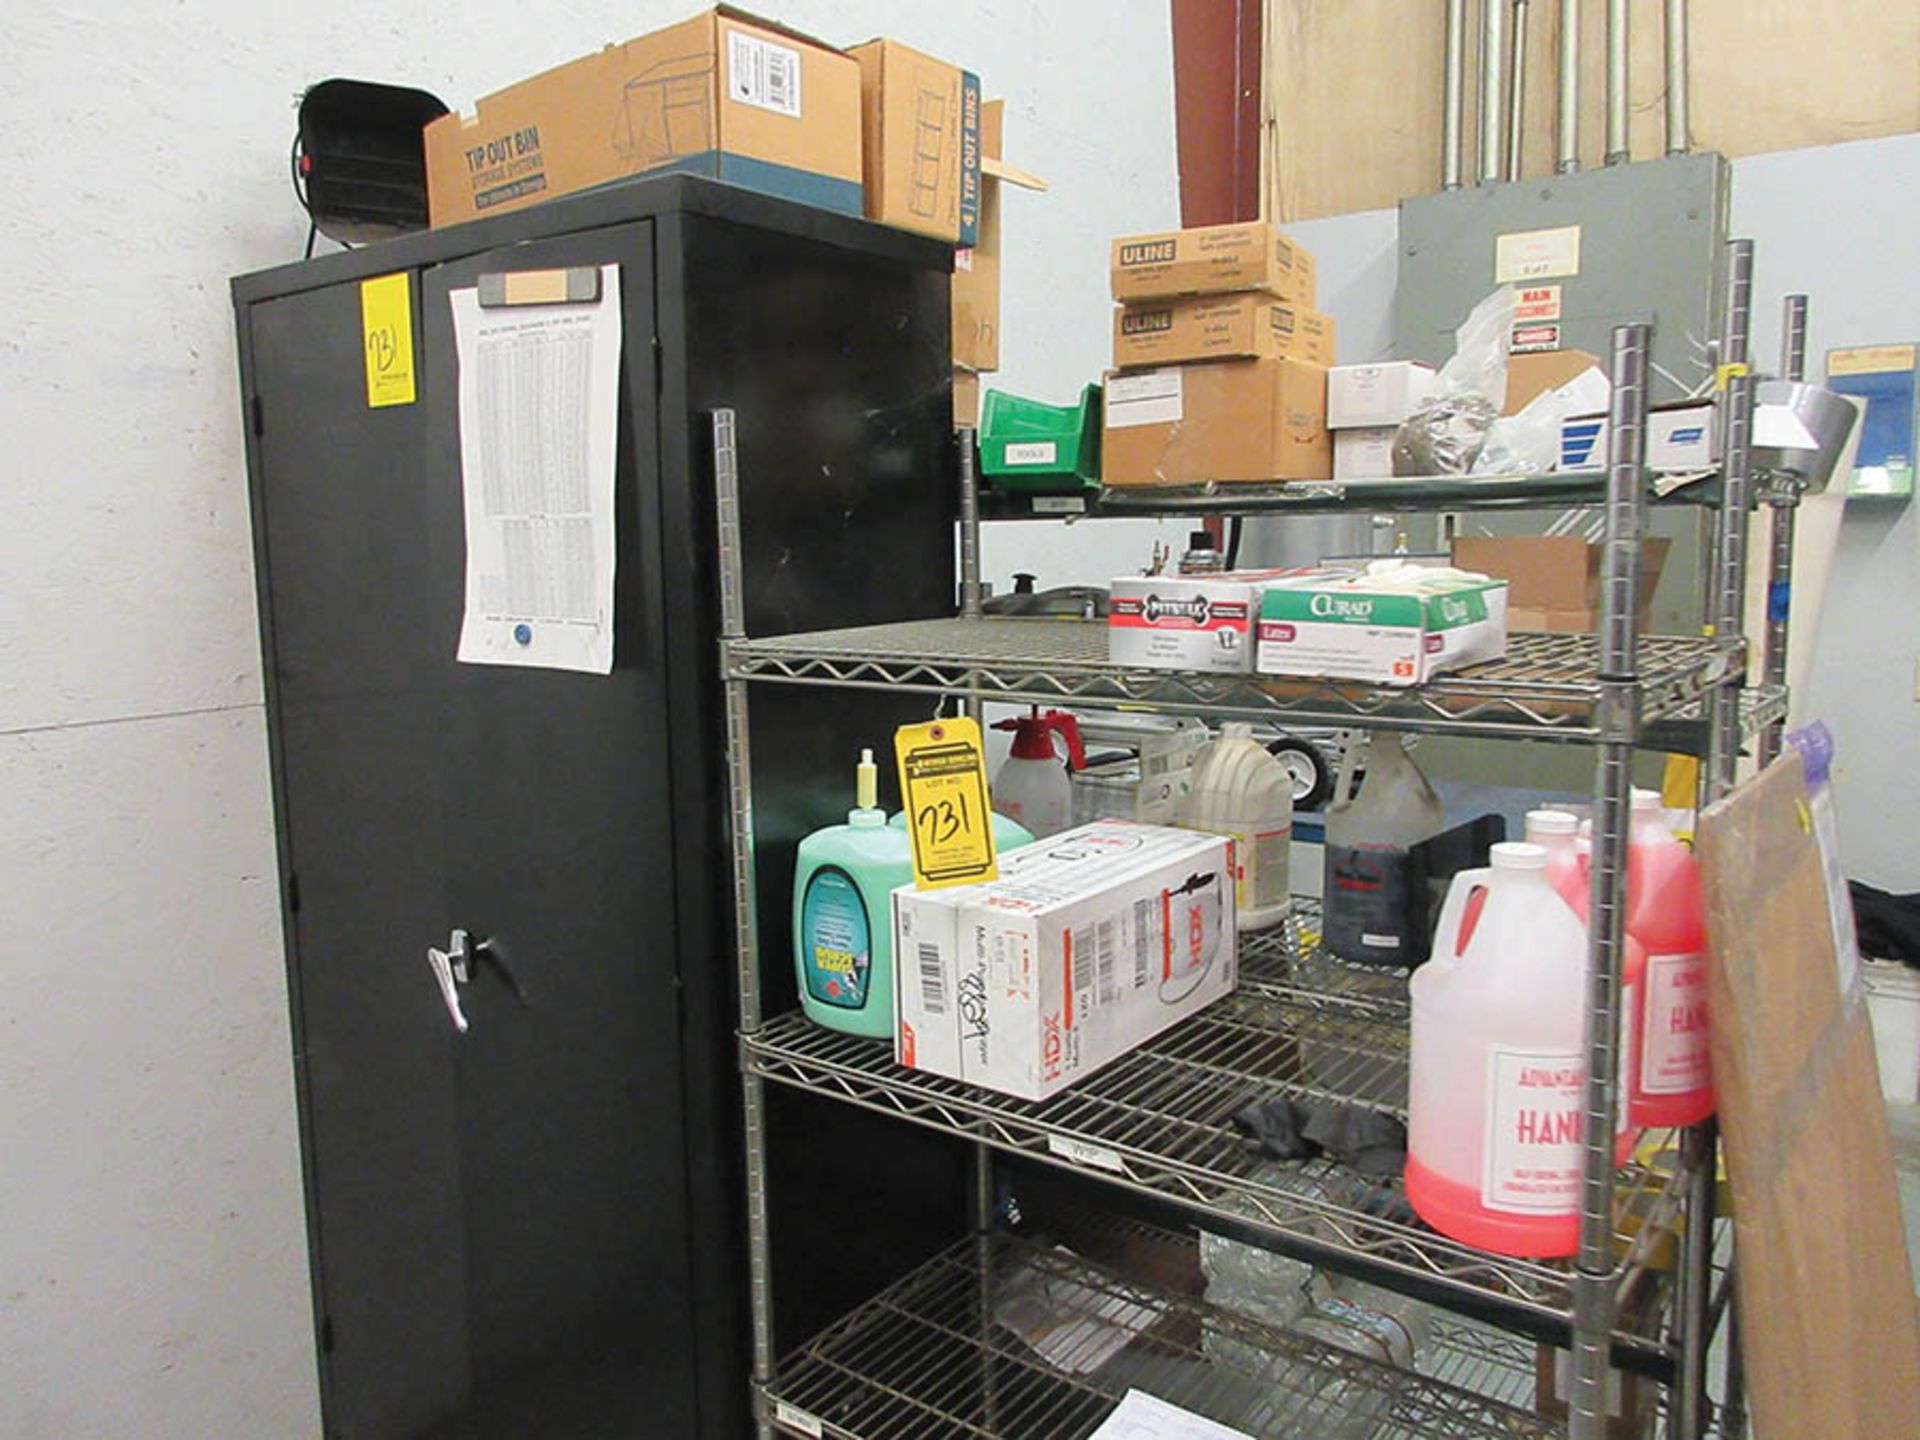 (6) METRO RACKS, (3) 2-DOOR CABINETS W/ CONTENTS OF PREPARED INVENTORY AND CLEANING PRODUCTS - Image 12 of 13